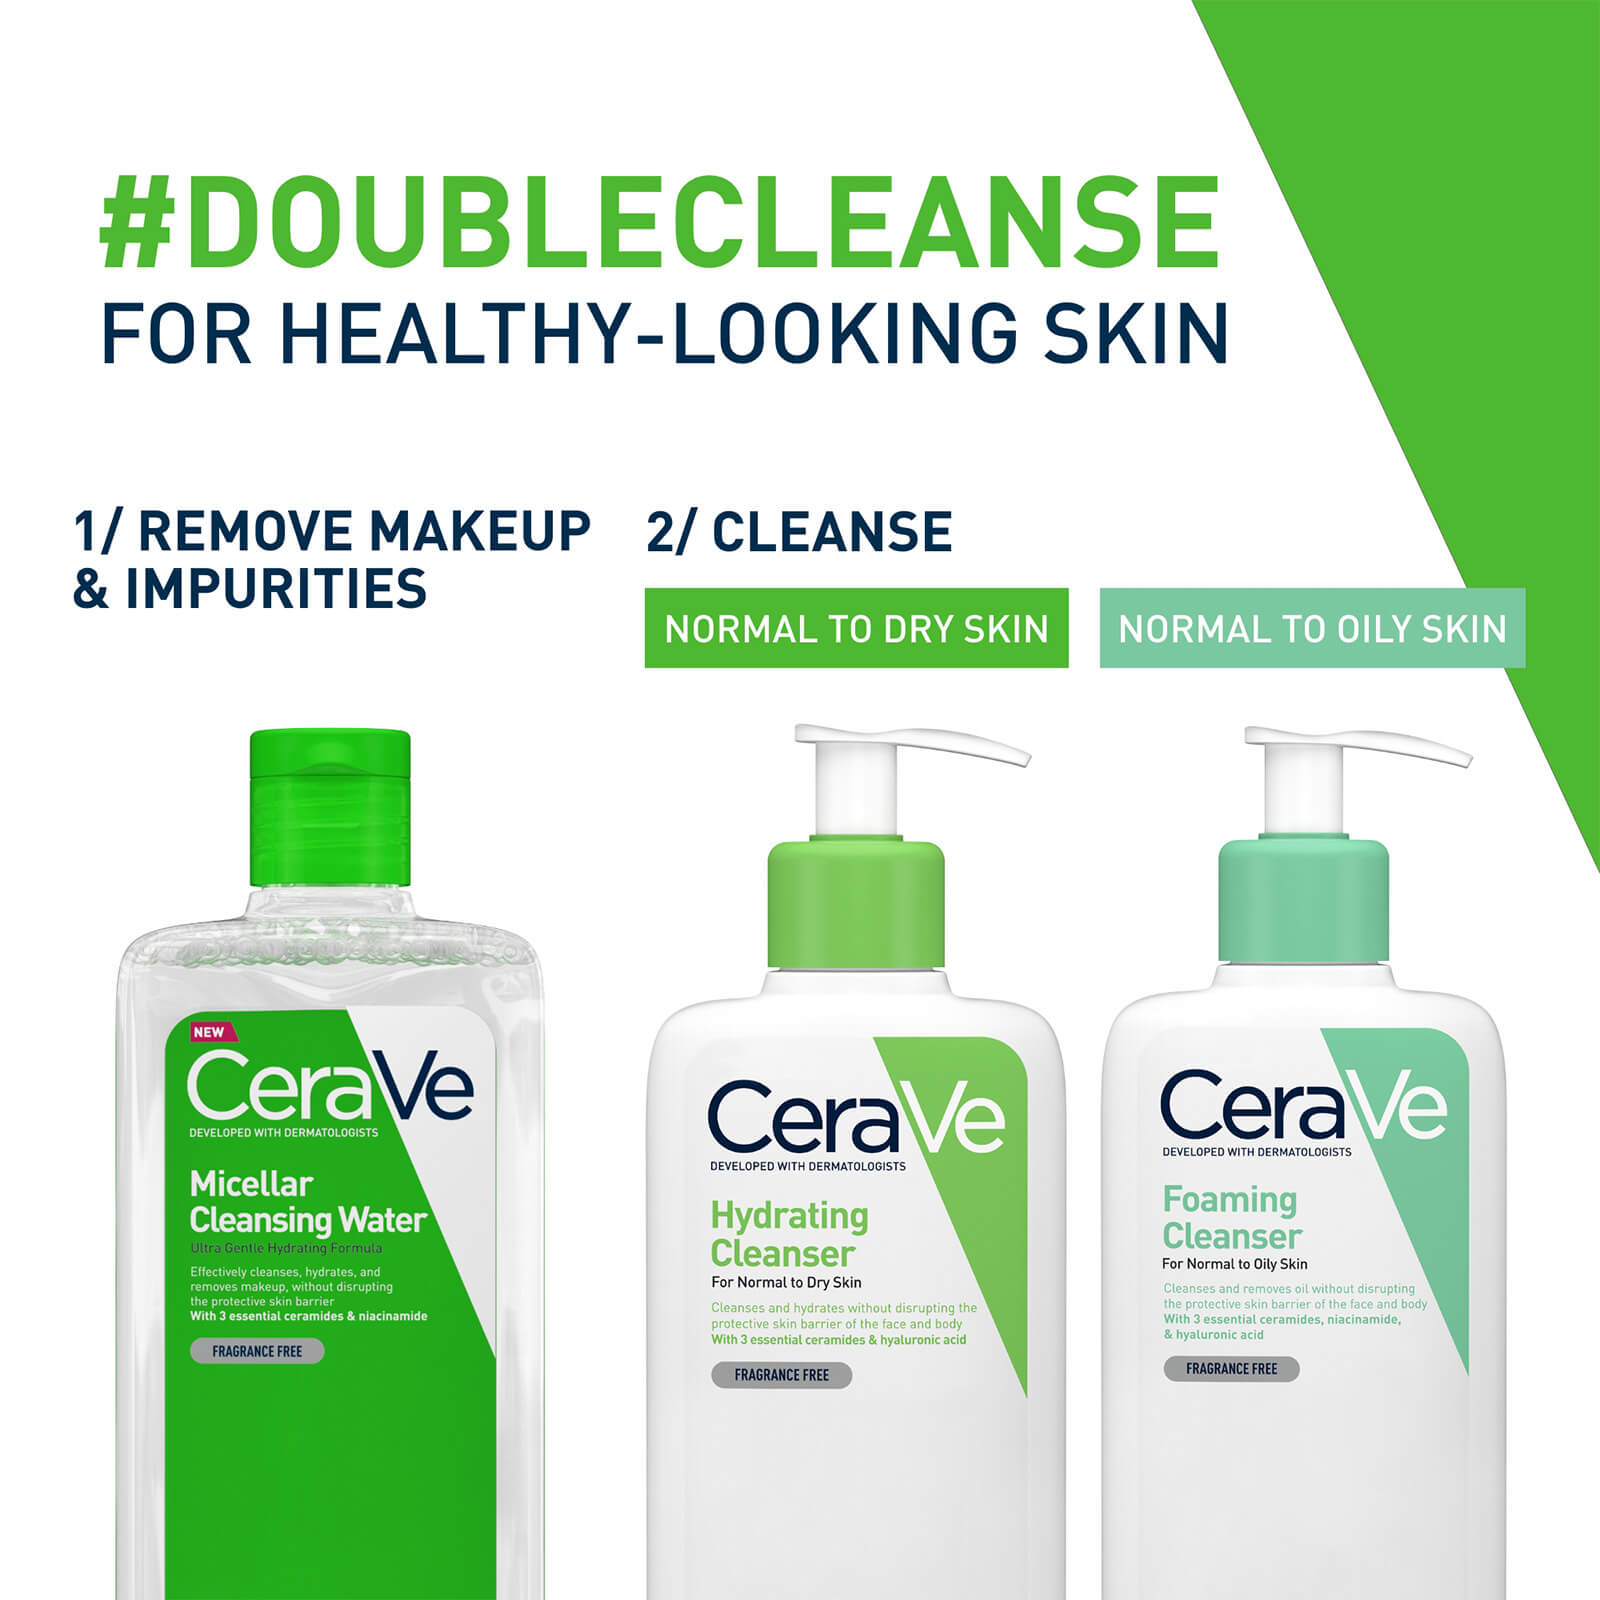 doublecleanse, for healthy looking skin, remove makeup and impurities, cleanse, for normal to dry skin